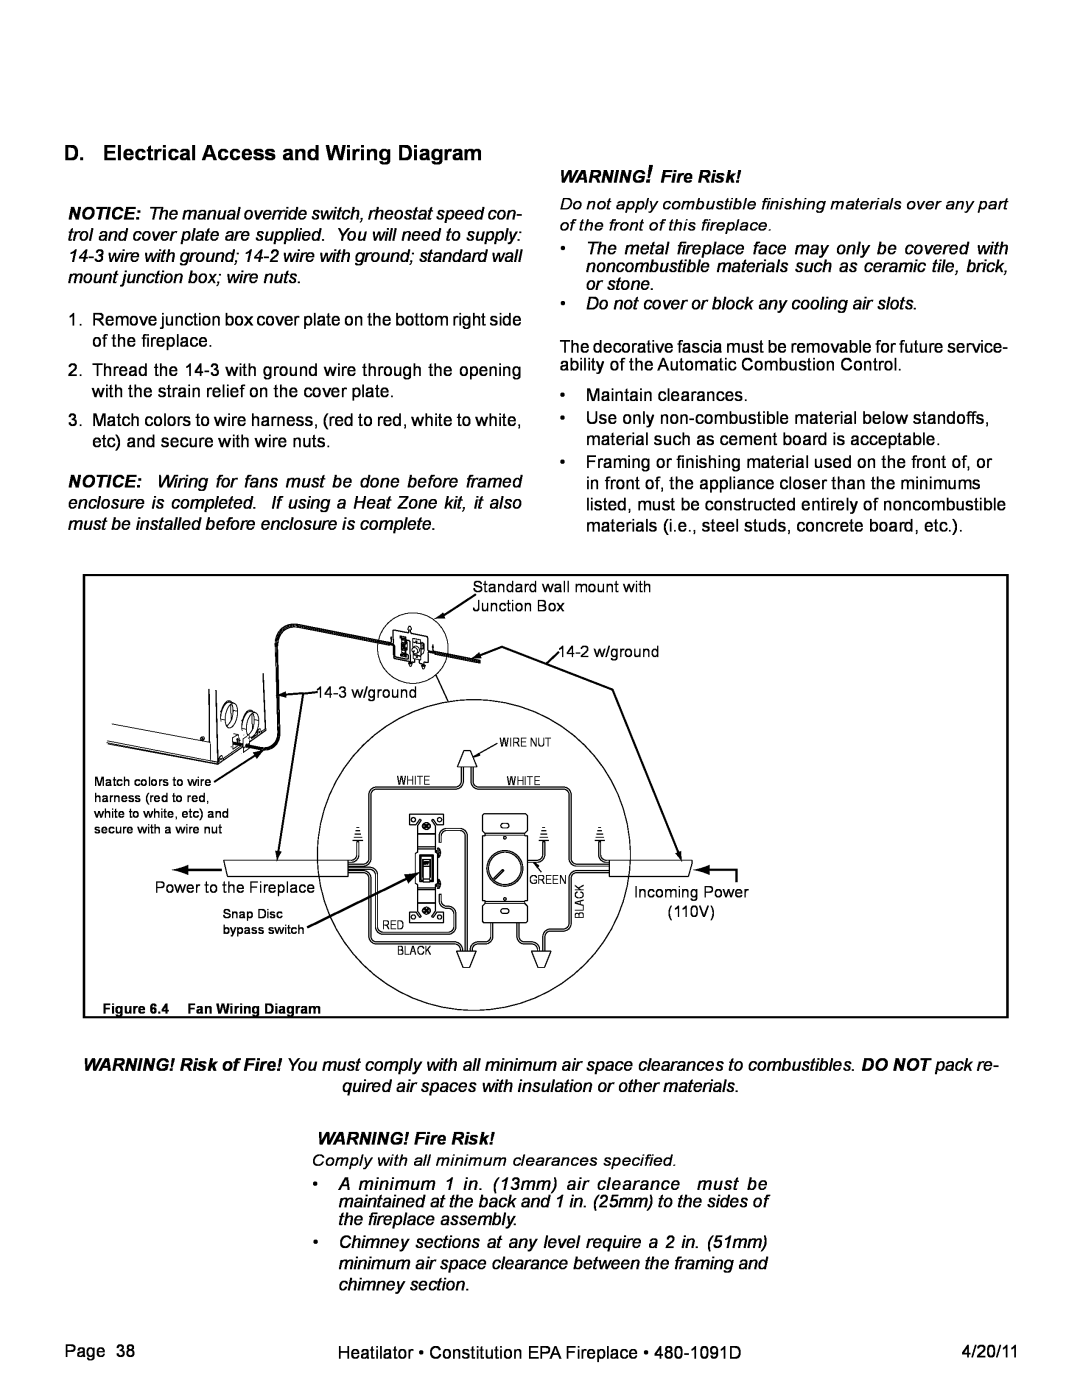 Heatiator C40 owner manual D. Electrical Access and Wiring Diagram, WARNING! Fire Risk 